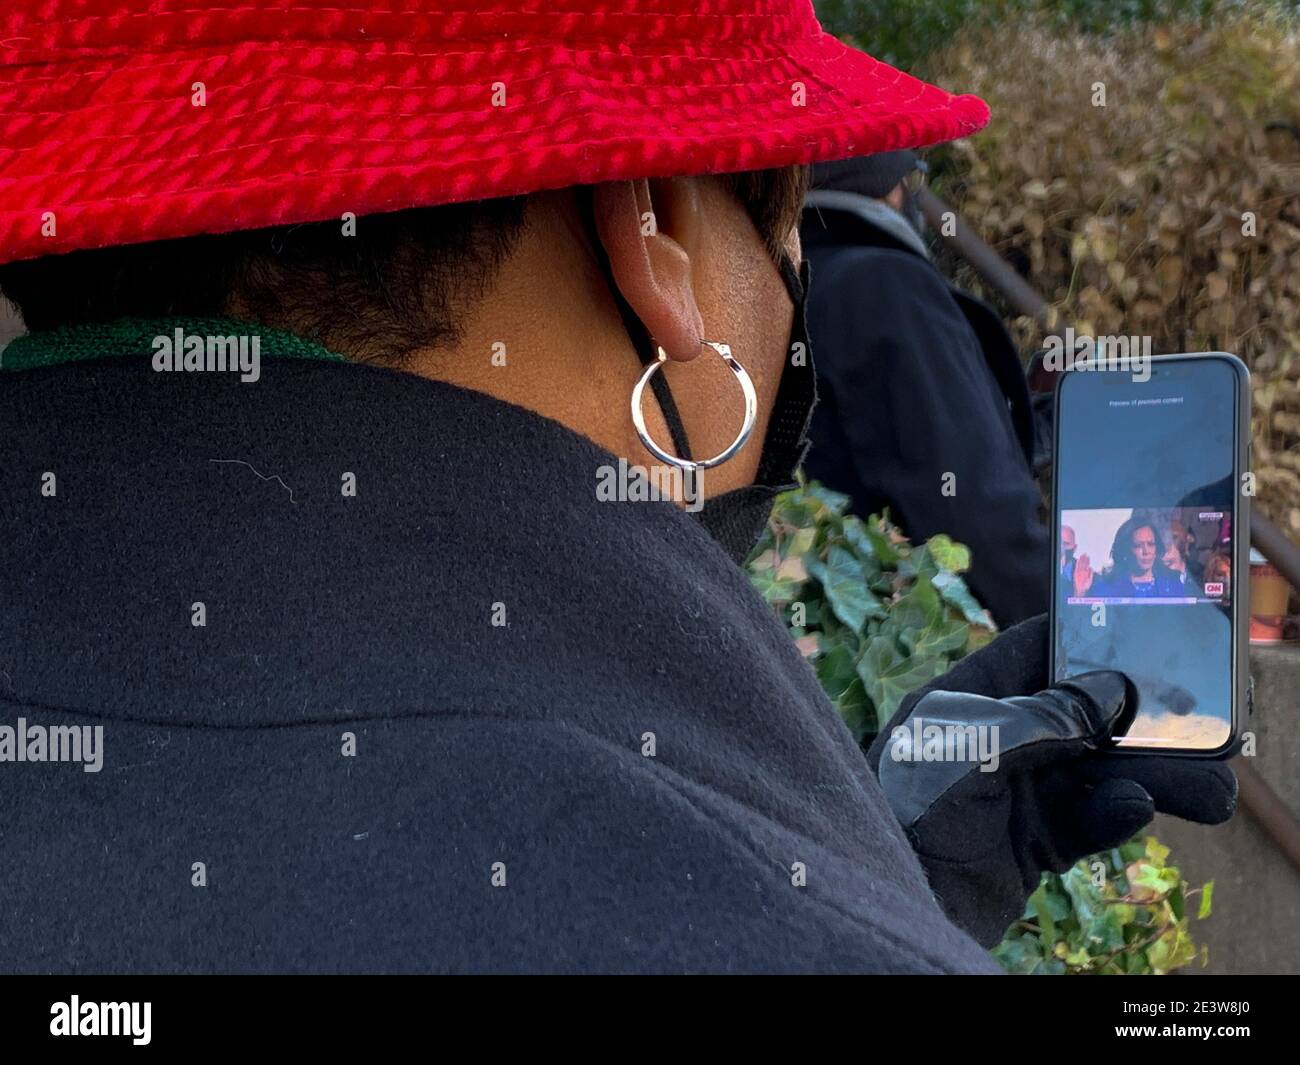 Washington, District of Columbia, USA. 20th Jan, 2021. Lisa Williams came from San Francisco to stand as close as she could to the U.S. Capitol just to hear Kamala Harris sworn in as Vice President. Credit: Sue Dorfman/ZUMA Wire/Alamy Live News Stock Photo